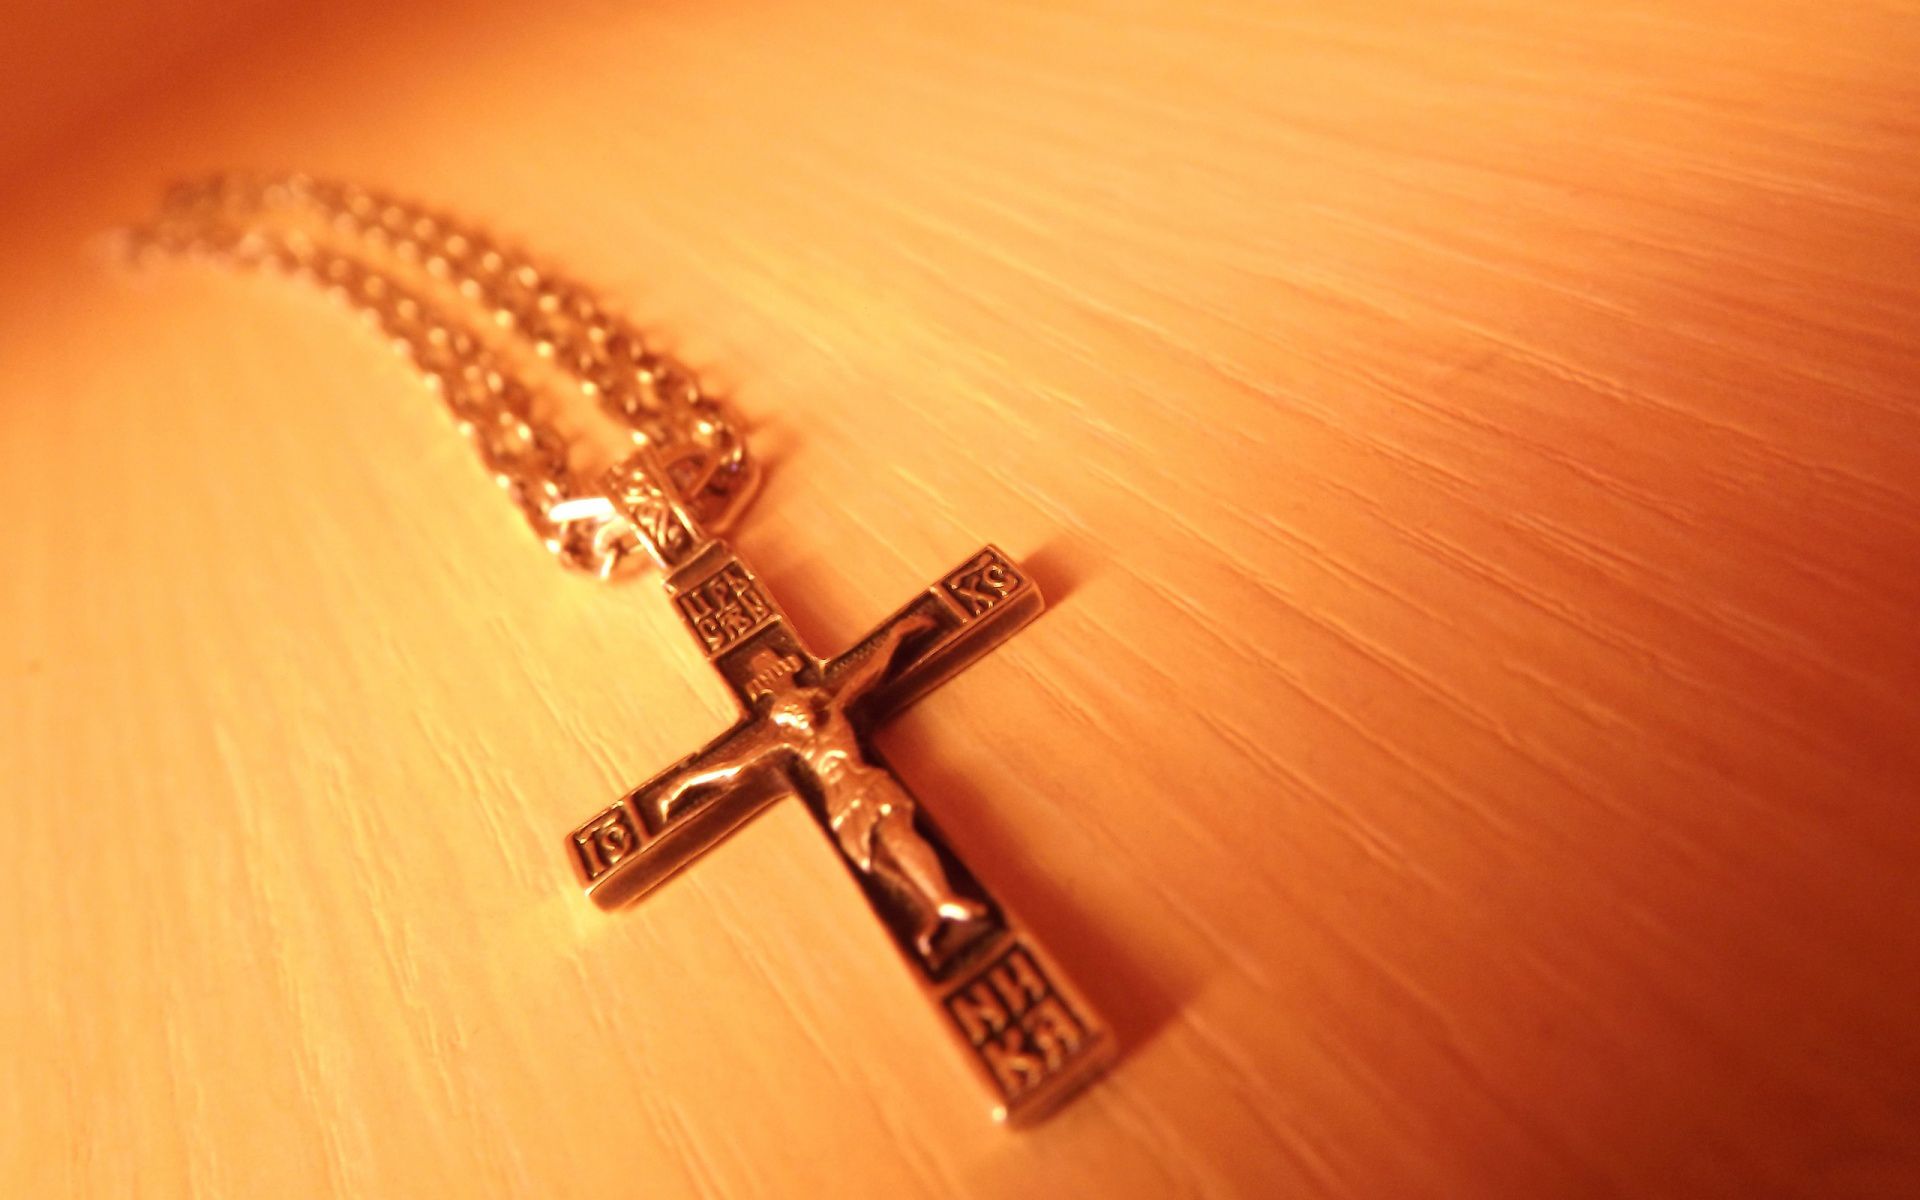 A gold crucifix necklace with Jesus on it - Cross